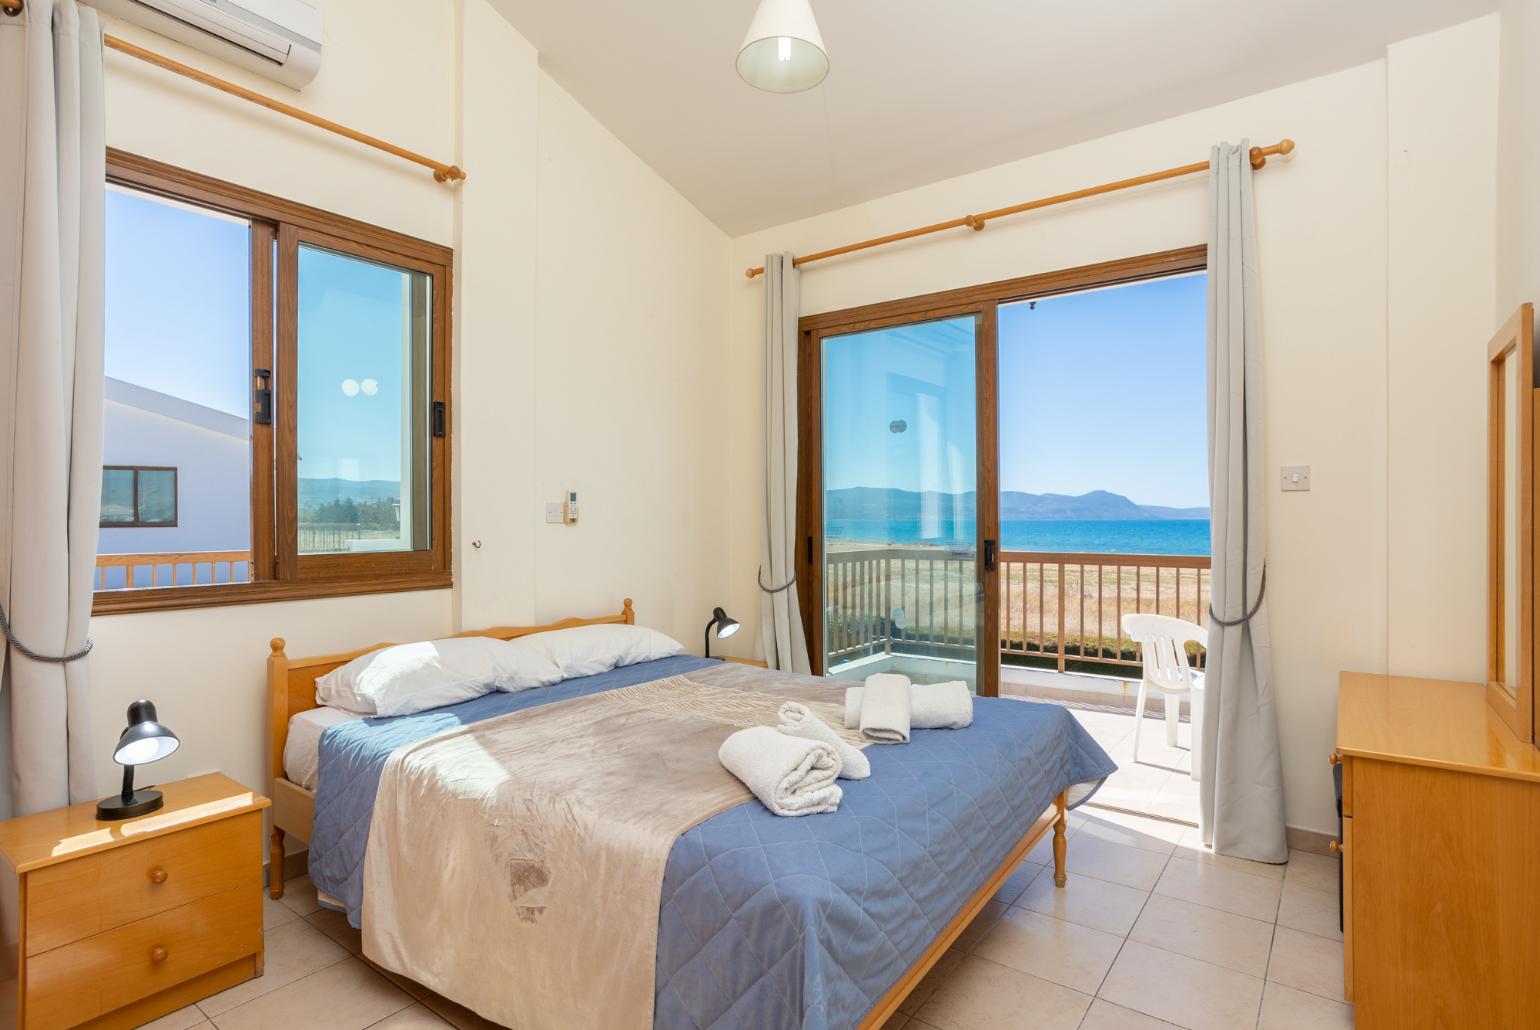 Double bedroom with A/C, sea views, and balcony access